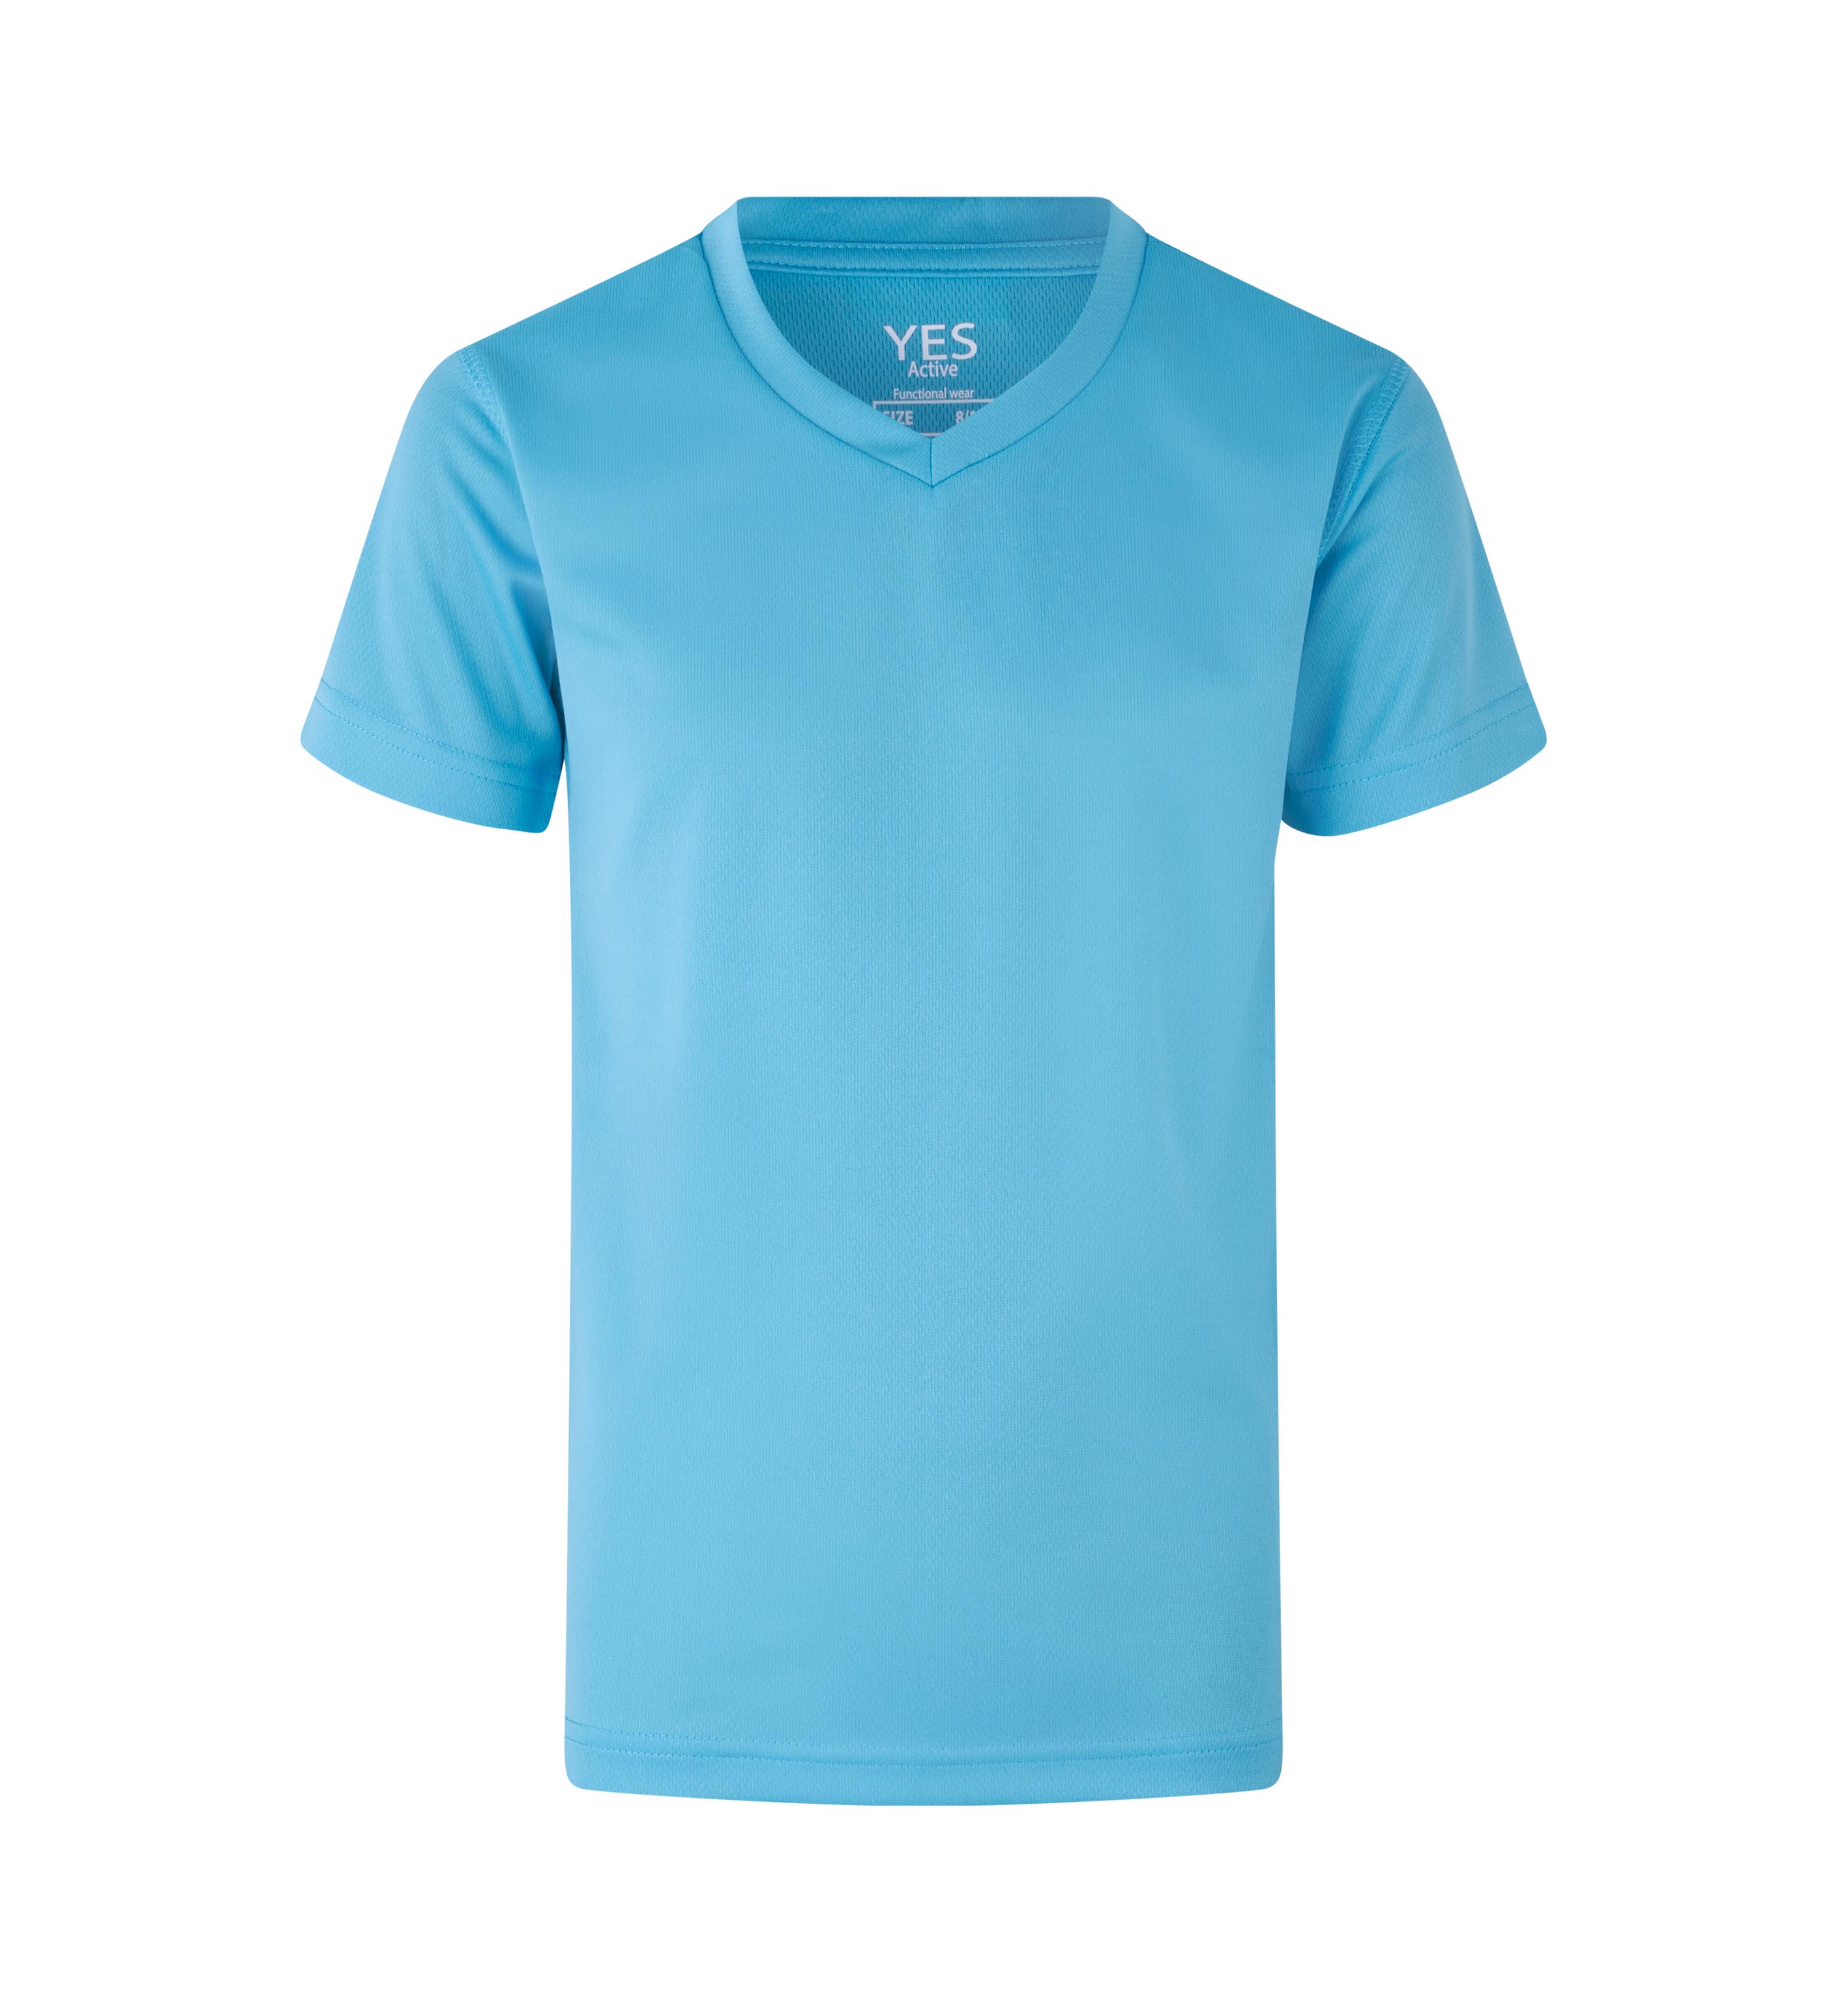 YES Active Kinder T-Shirt 130 g/m² ID Identity® Cyan 4/6 Jahre